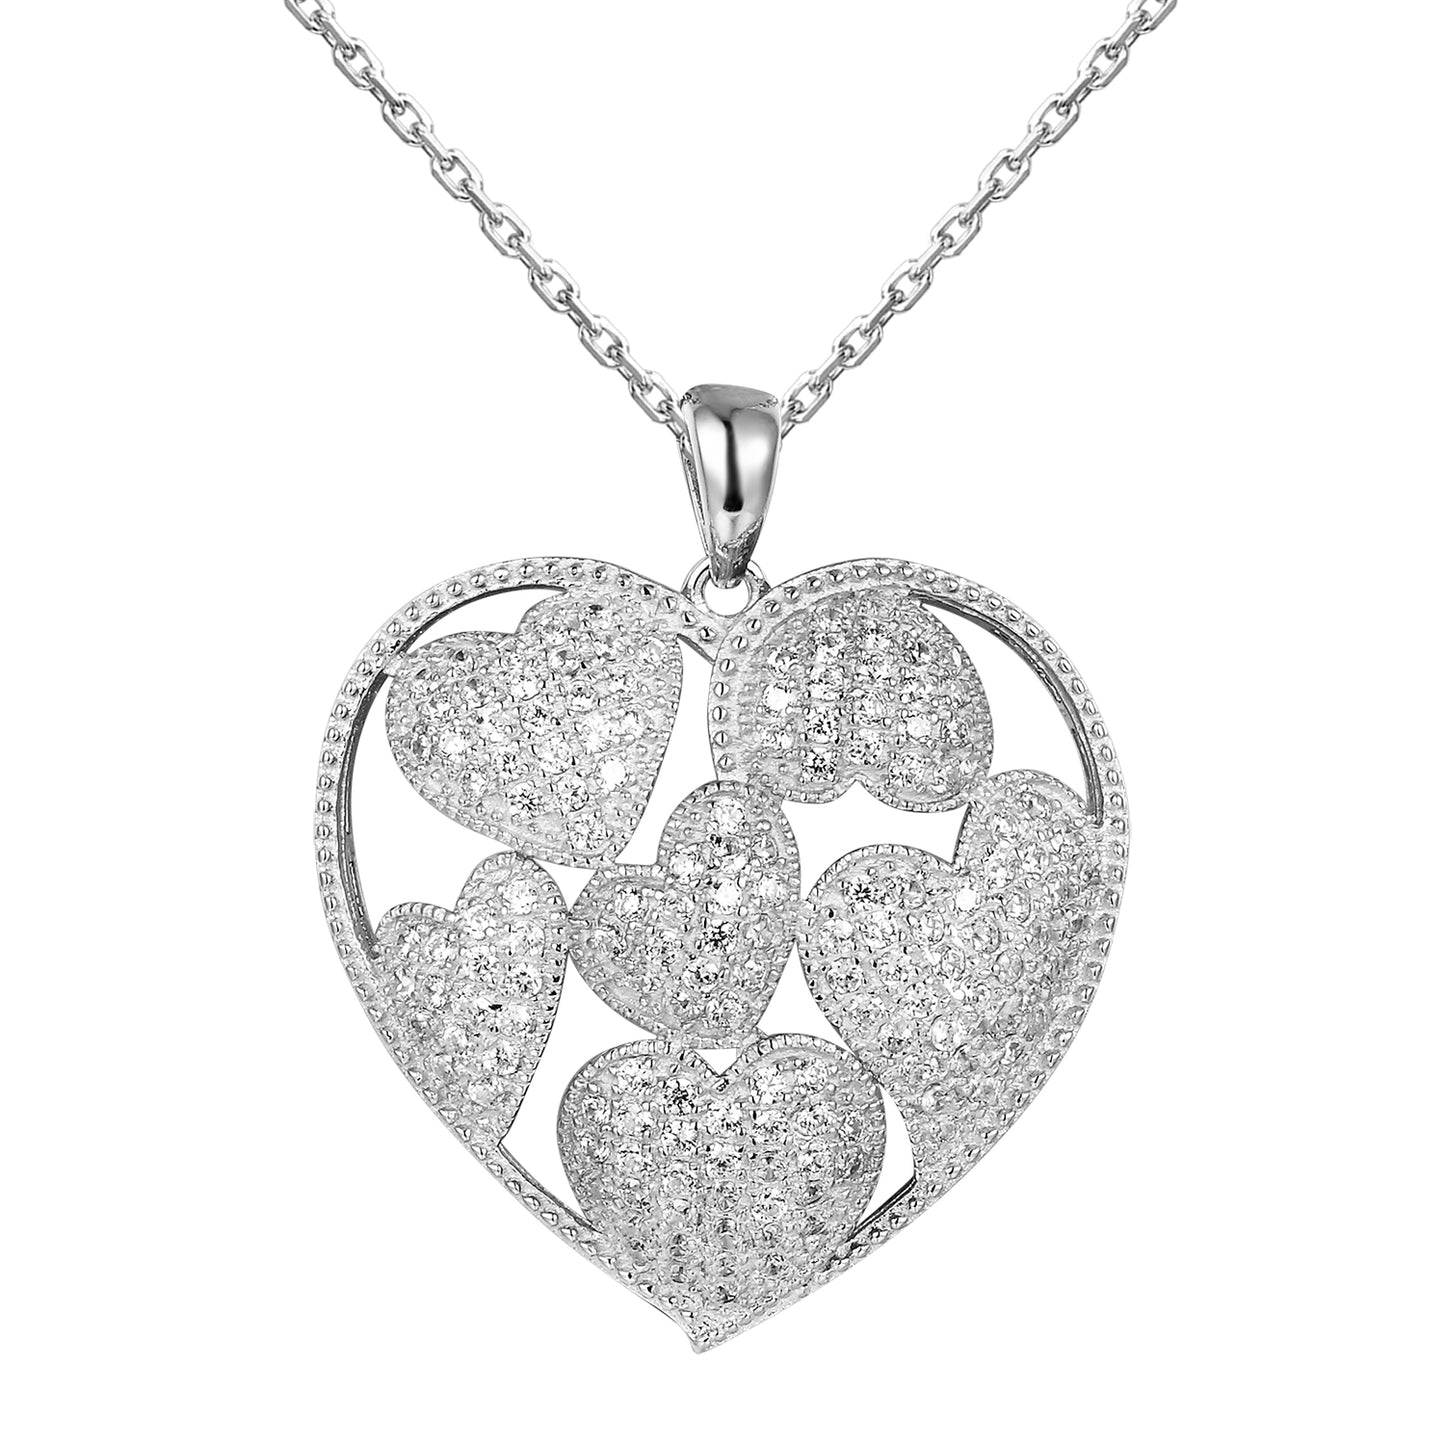 Hearts in Hearts Puffed Silver Heart Pendant Valentine's Set